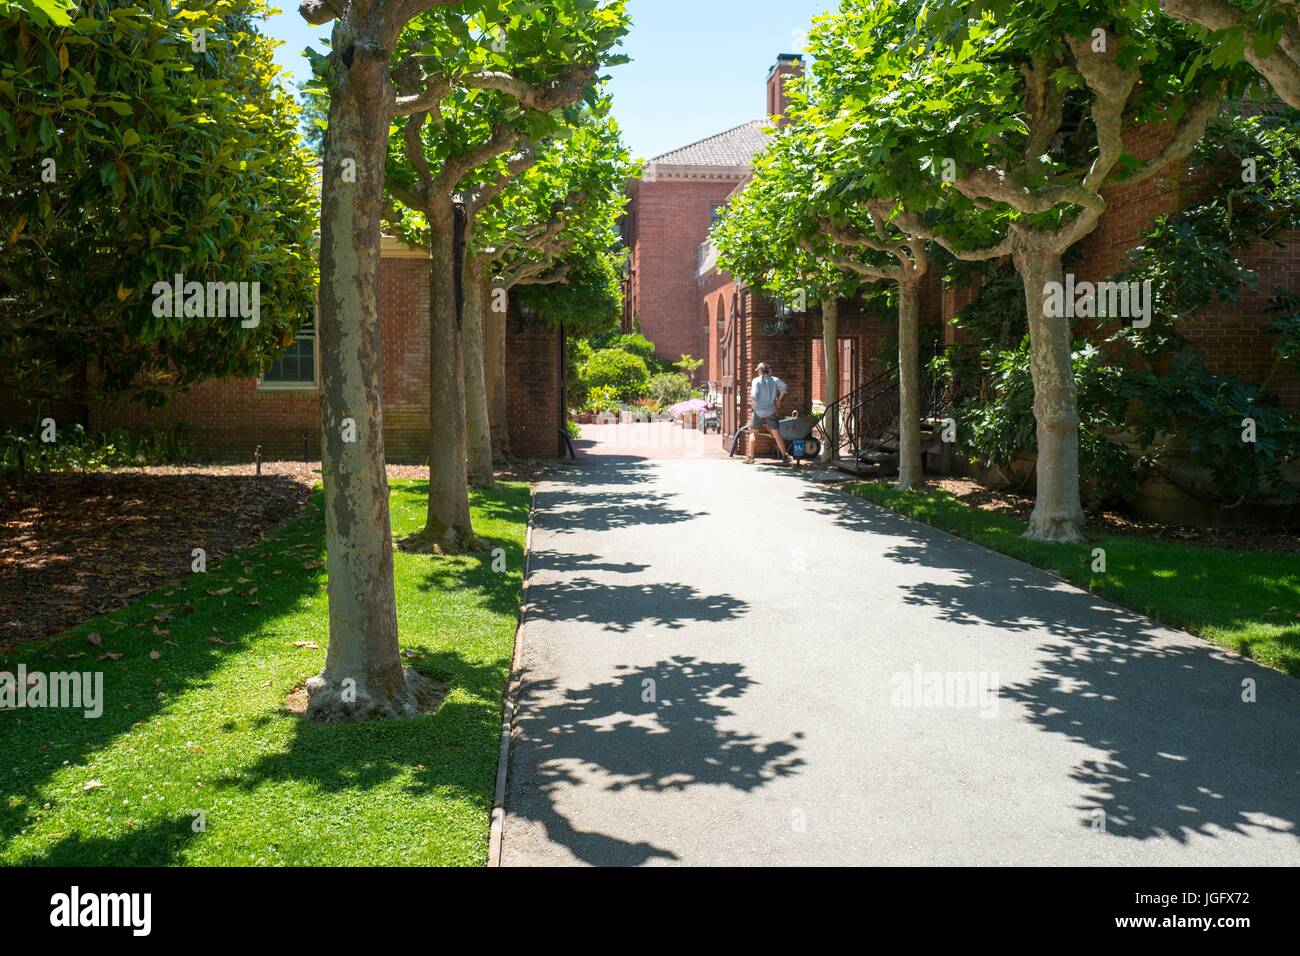 Approach to the main house, with a gardener performing maintenance tasks, at Filoli, a preserved country house, formal garden and estate operated by the National Trust for Historic Preservation in Woodside, California, June 23, 2017. Stock Photo